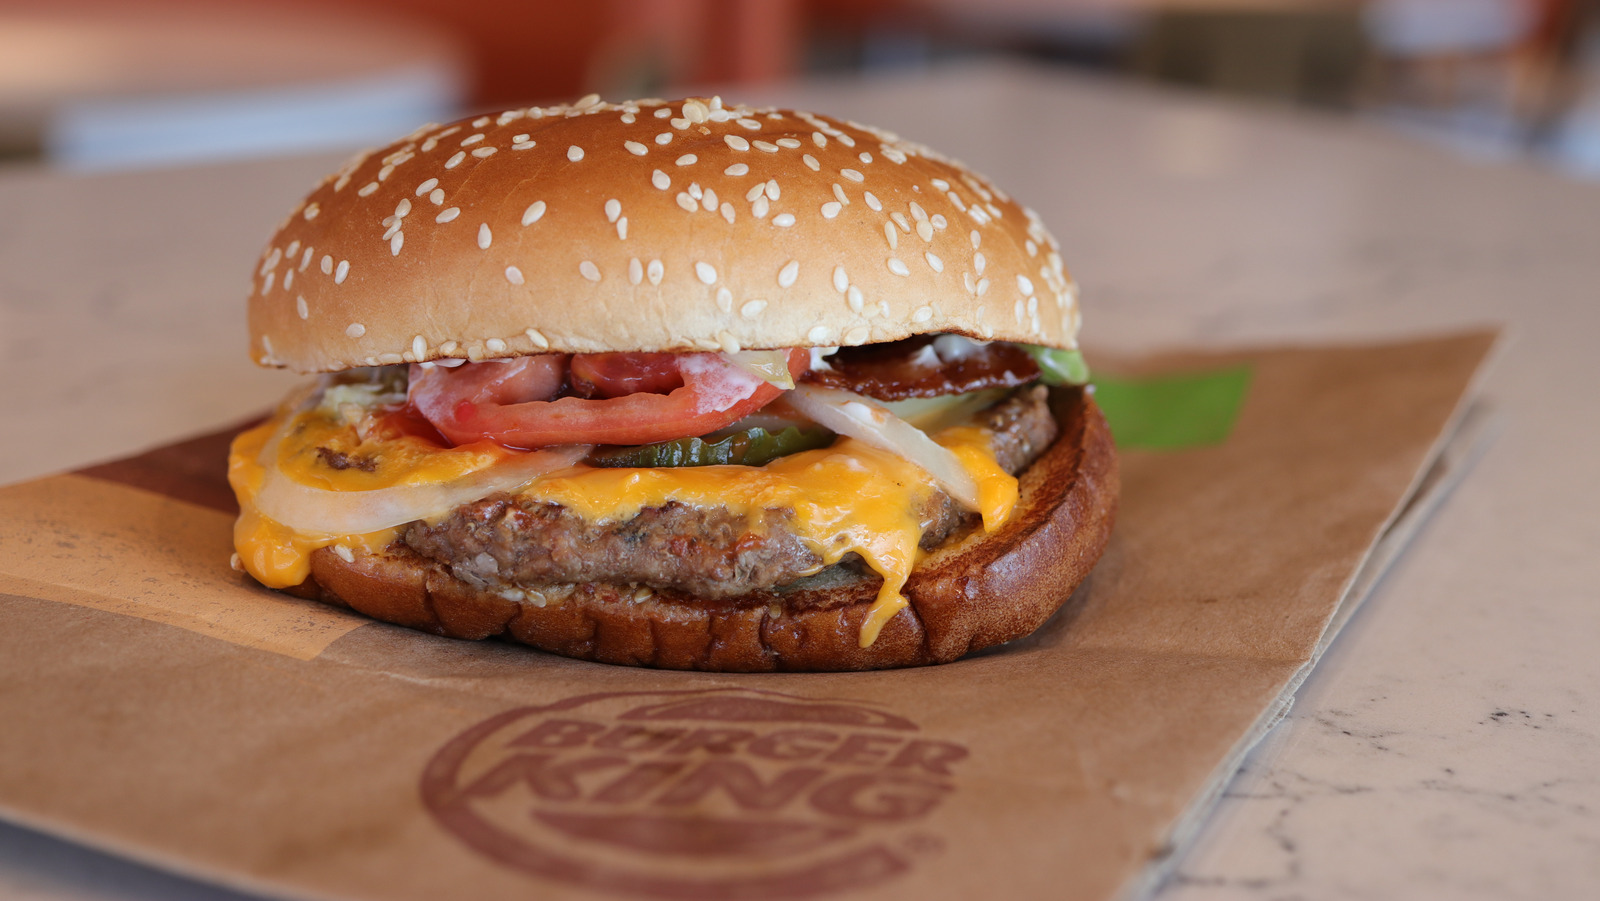 Here's How Much The First Burger King Whopper Cost